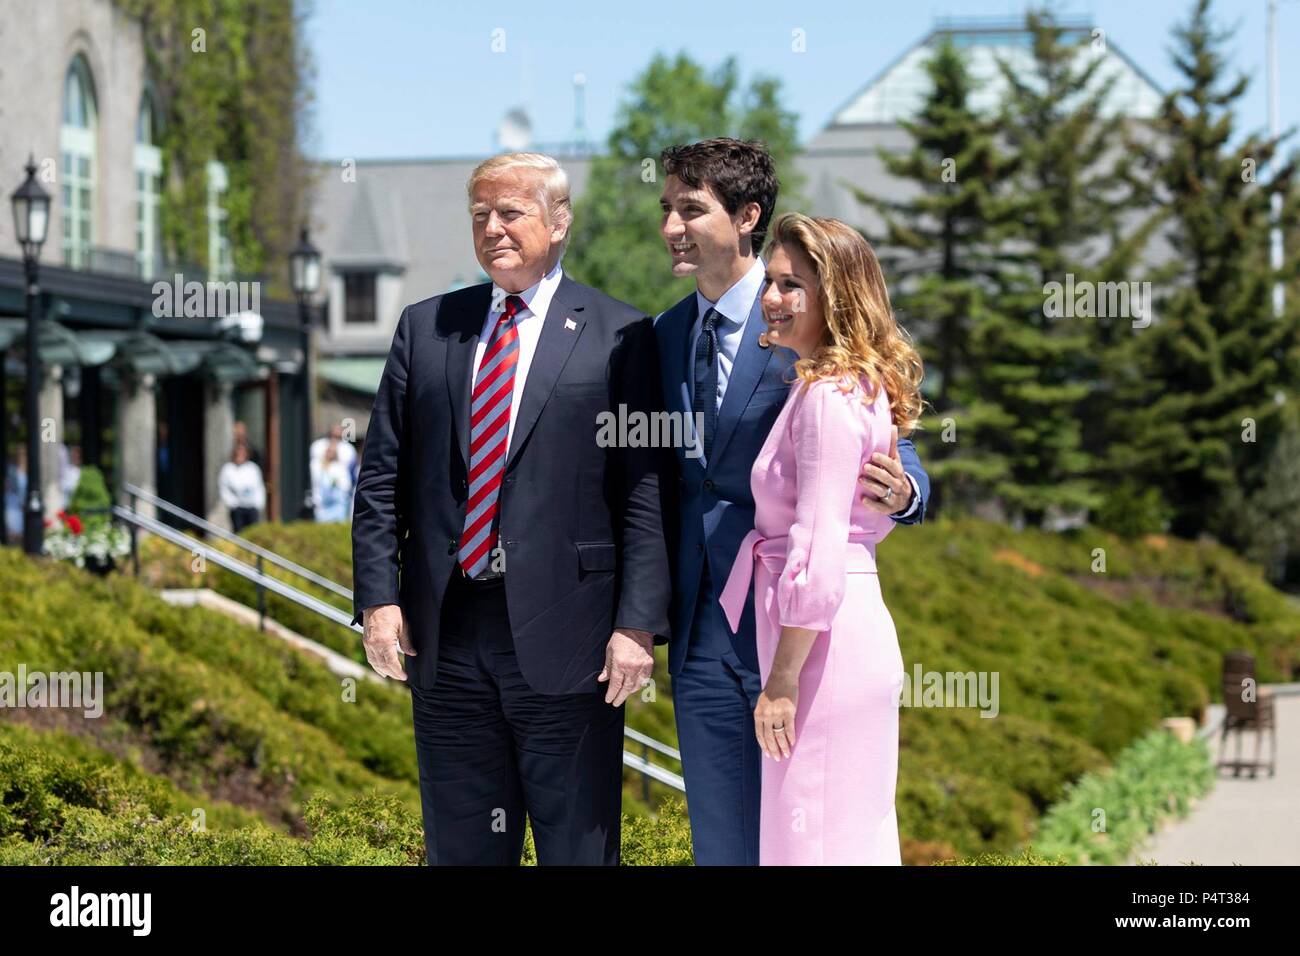 U.S. President Donald Trump is welcomed by Canadian Prime Minister Justin Trudeau and his wife Sophie Gregoire Trudeau on arrival for the G7 Summit June 8, 2018 in Charlevoix, Quebec, Canada. Stock Photo